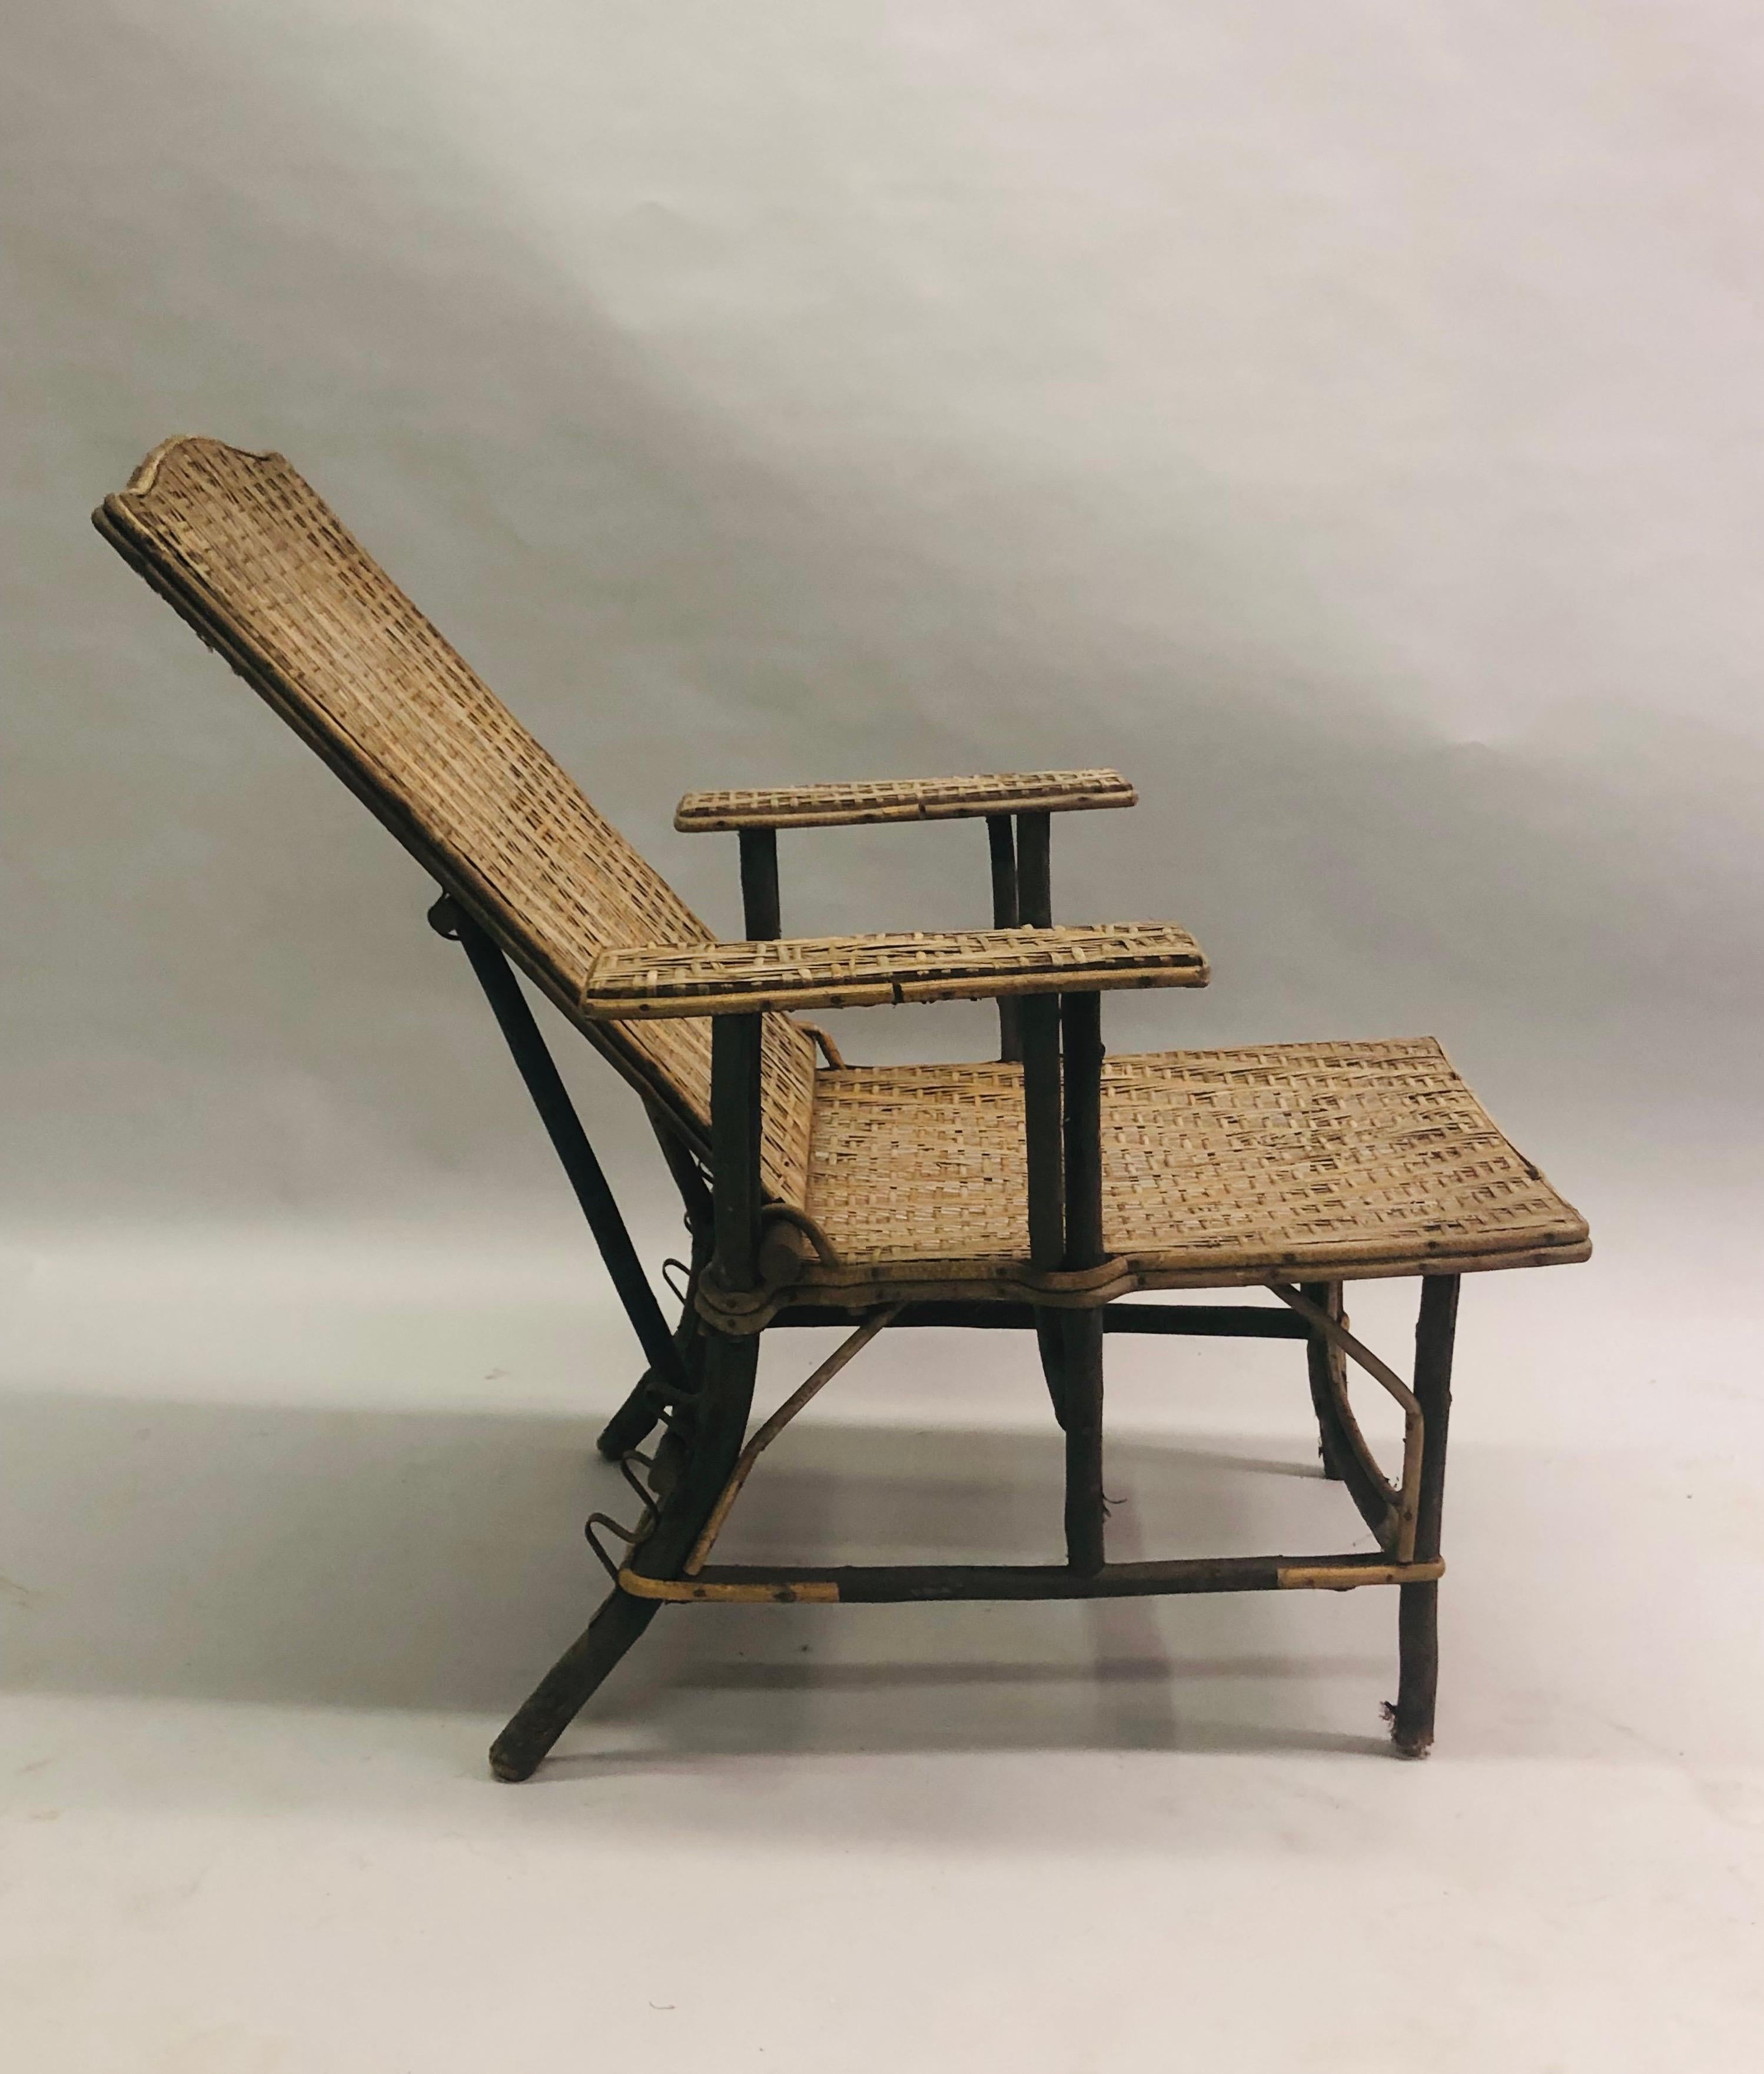 Early 20th Century French Art Deco Rattan Lounge Chair / Recliner / Chaise Longue, 1920 For Sale